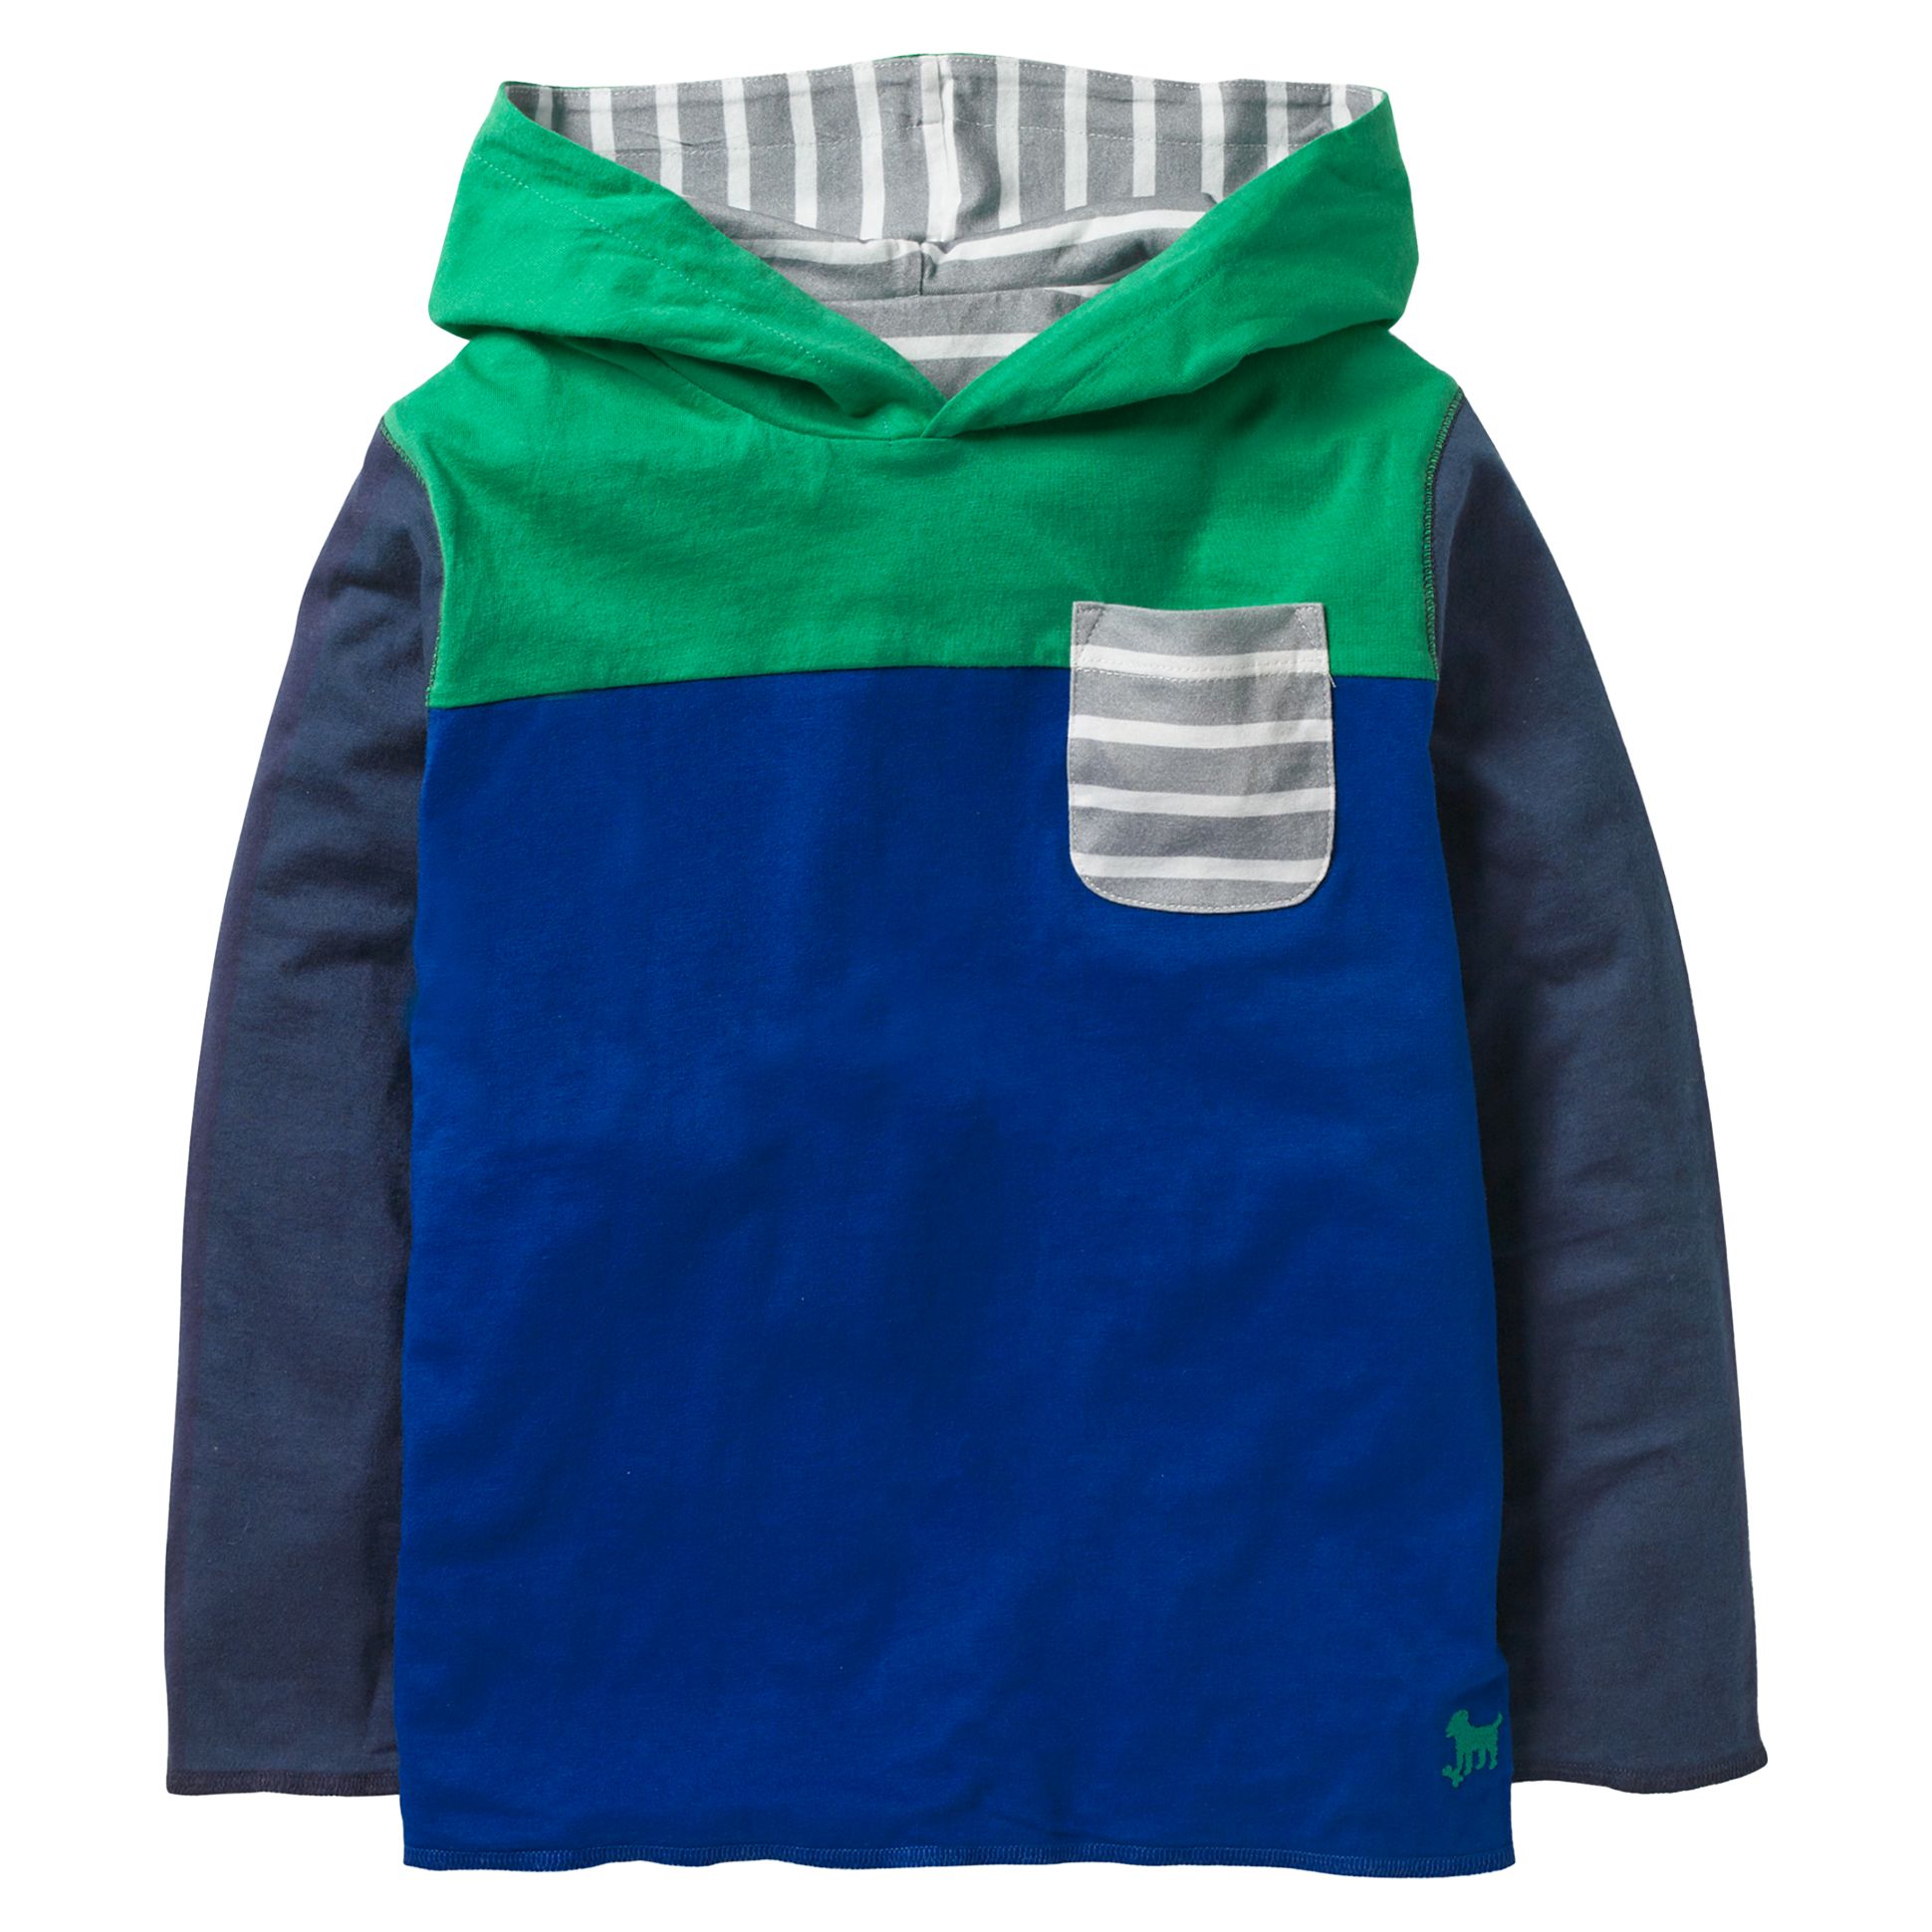 Mini Boden Boys' Reversible Hooded Top, Blue/Grey, 11-12 years